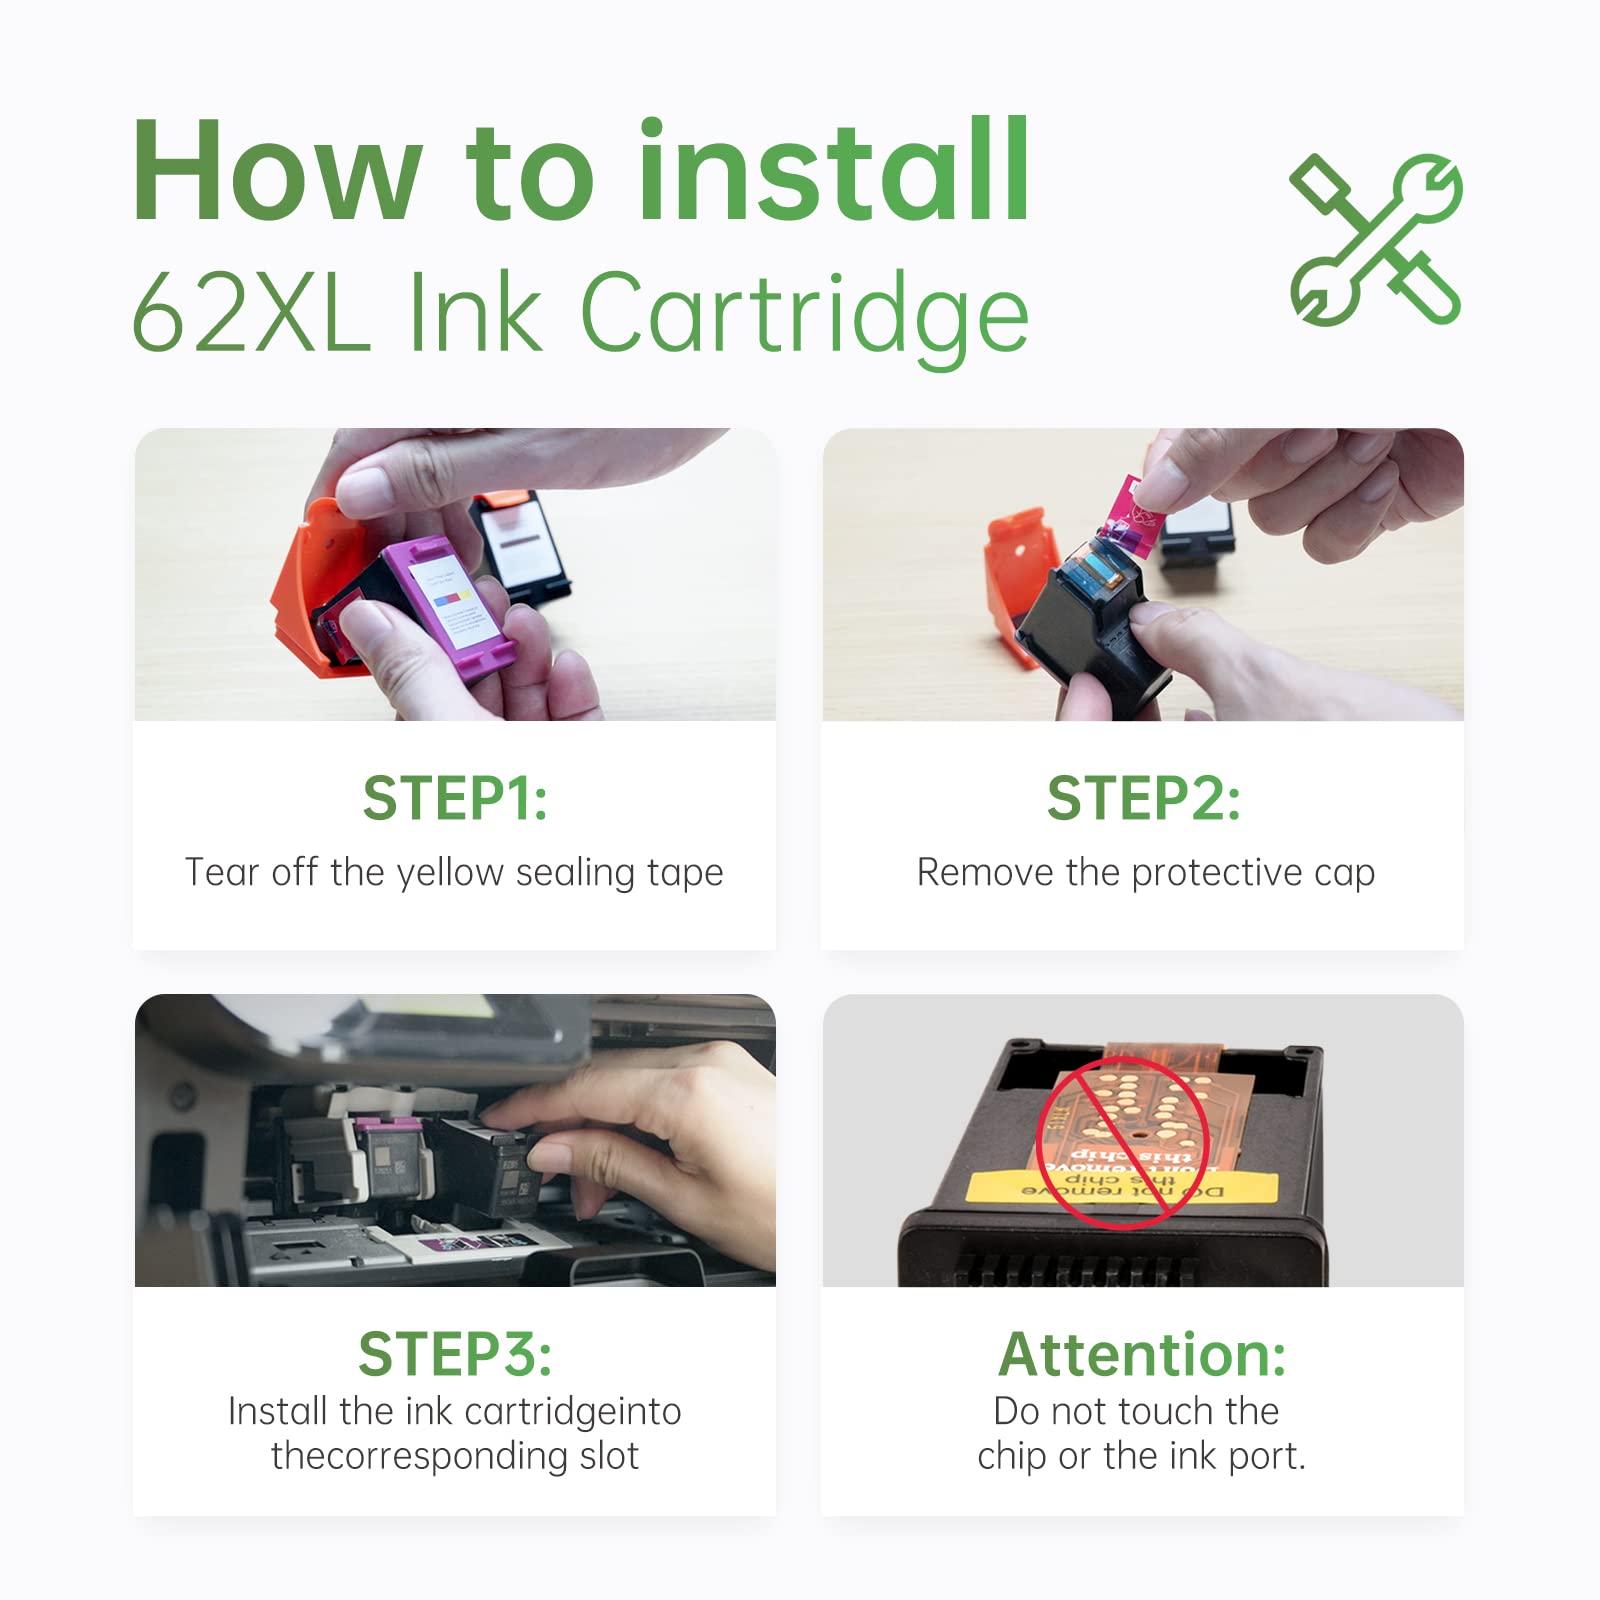 Installation Guide for HP 62XL Ink Cartridge Combo Pack:Step-by-step instructional images for installing HP 62XL ink cartridges, including steps to remove sealing tape and protective caps, ensuring proper insertion without damaging the chip.